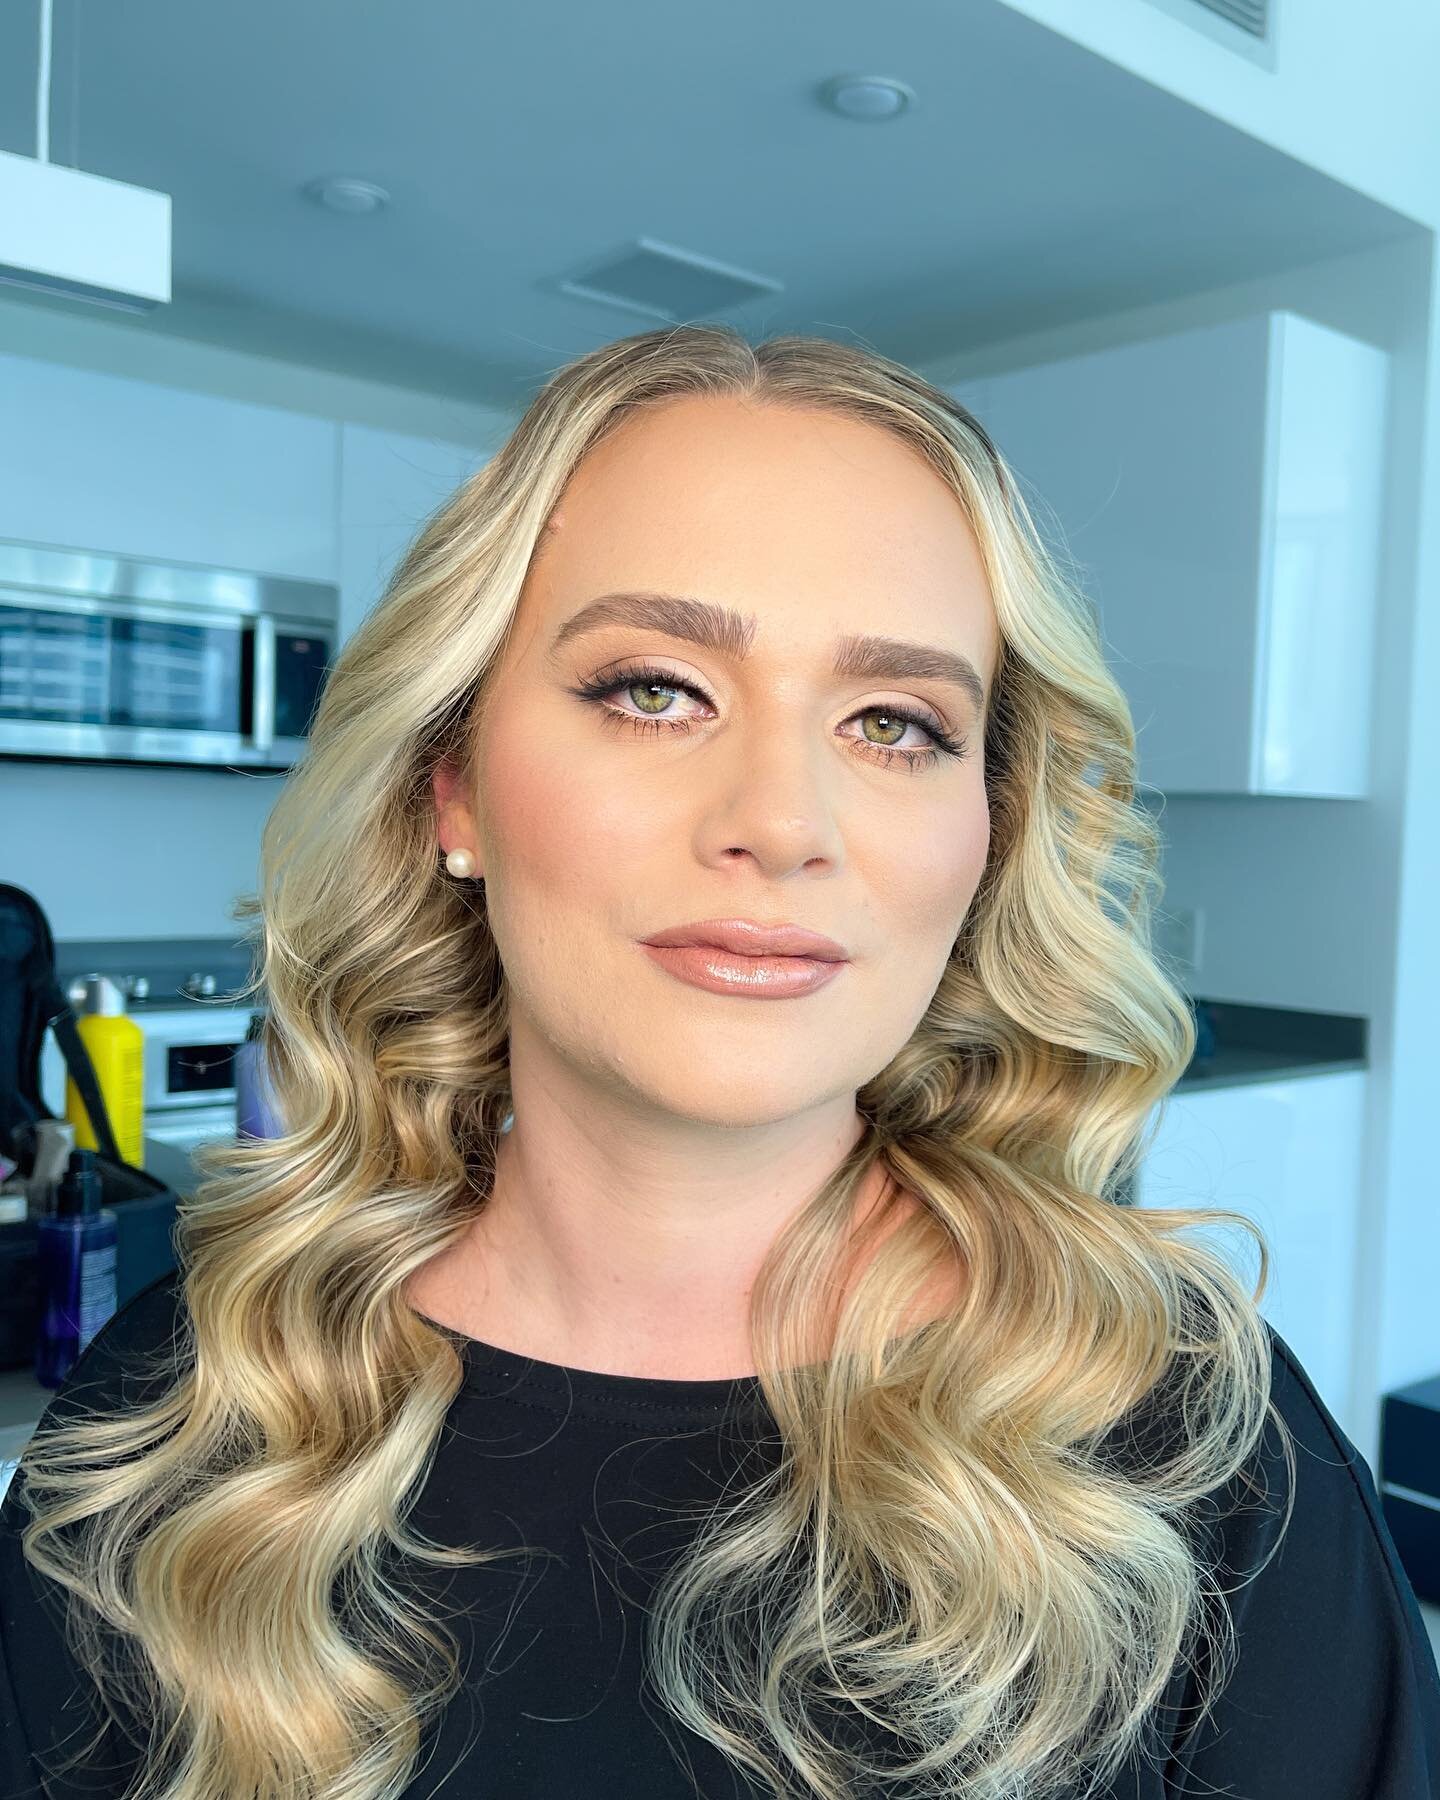 One of My Signature Looks 💜 Sculpted Skin, Neutral Eyeshadow &amp; Lips, With Glam Curls. 
It&rsquo;s been my most requested look lately ☺️ 

I did this look 3 times in a row this weekend 🥰 I love knowing its a favorite! ✨

☝🏼Quick tip For my MUAs